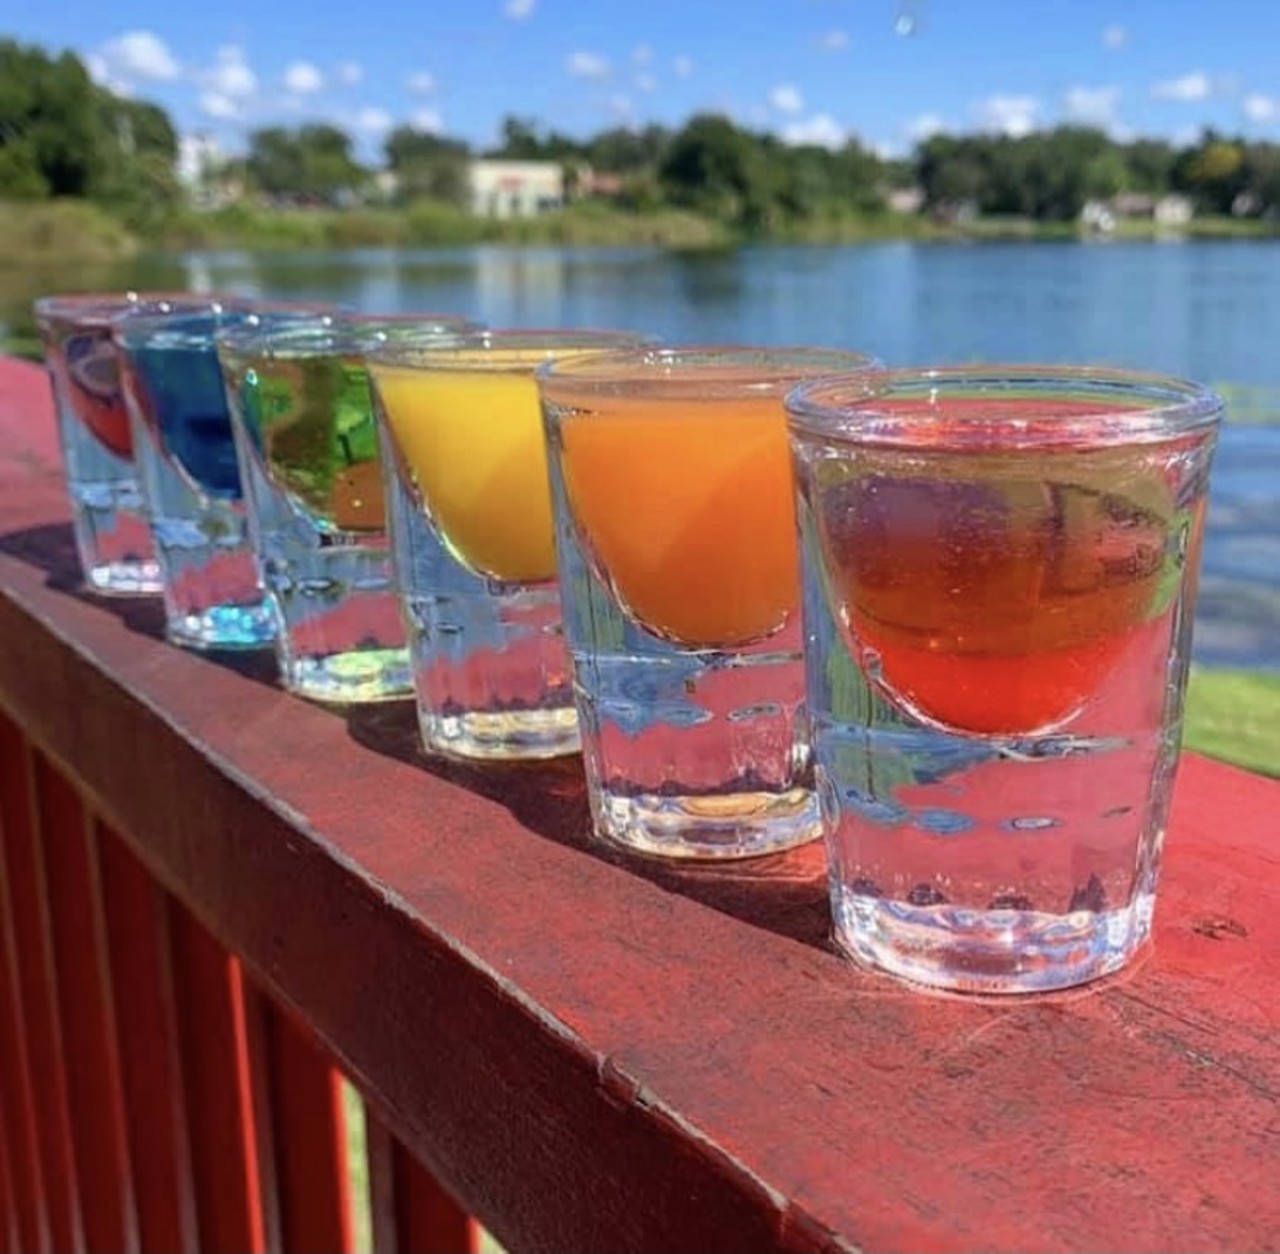 The Waterfront 
4201 South Orange Ave. Orlando, FL 32806, (407) 866-0468
Have an amazing outdoor dining experience with a beautiful view at The Waterfront. 
Photo via The Waterfront/Instagram